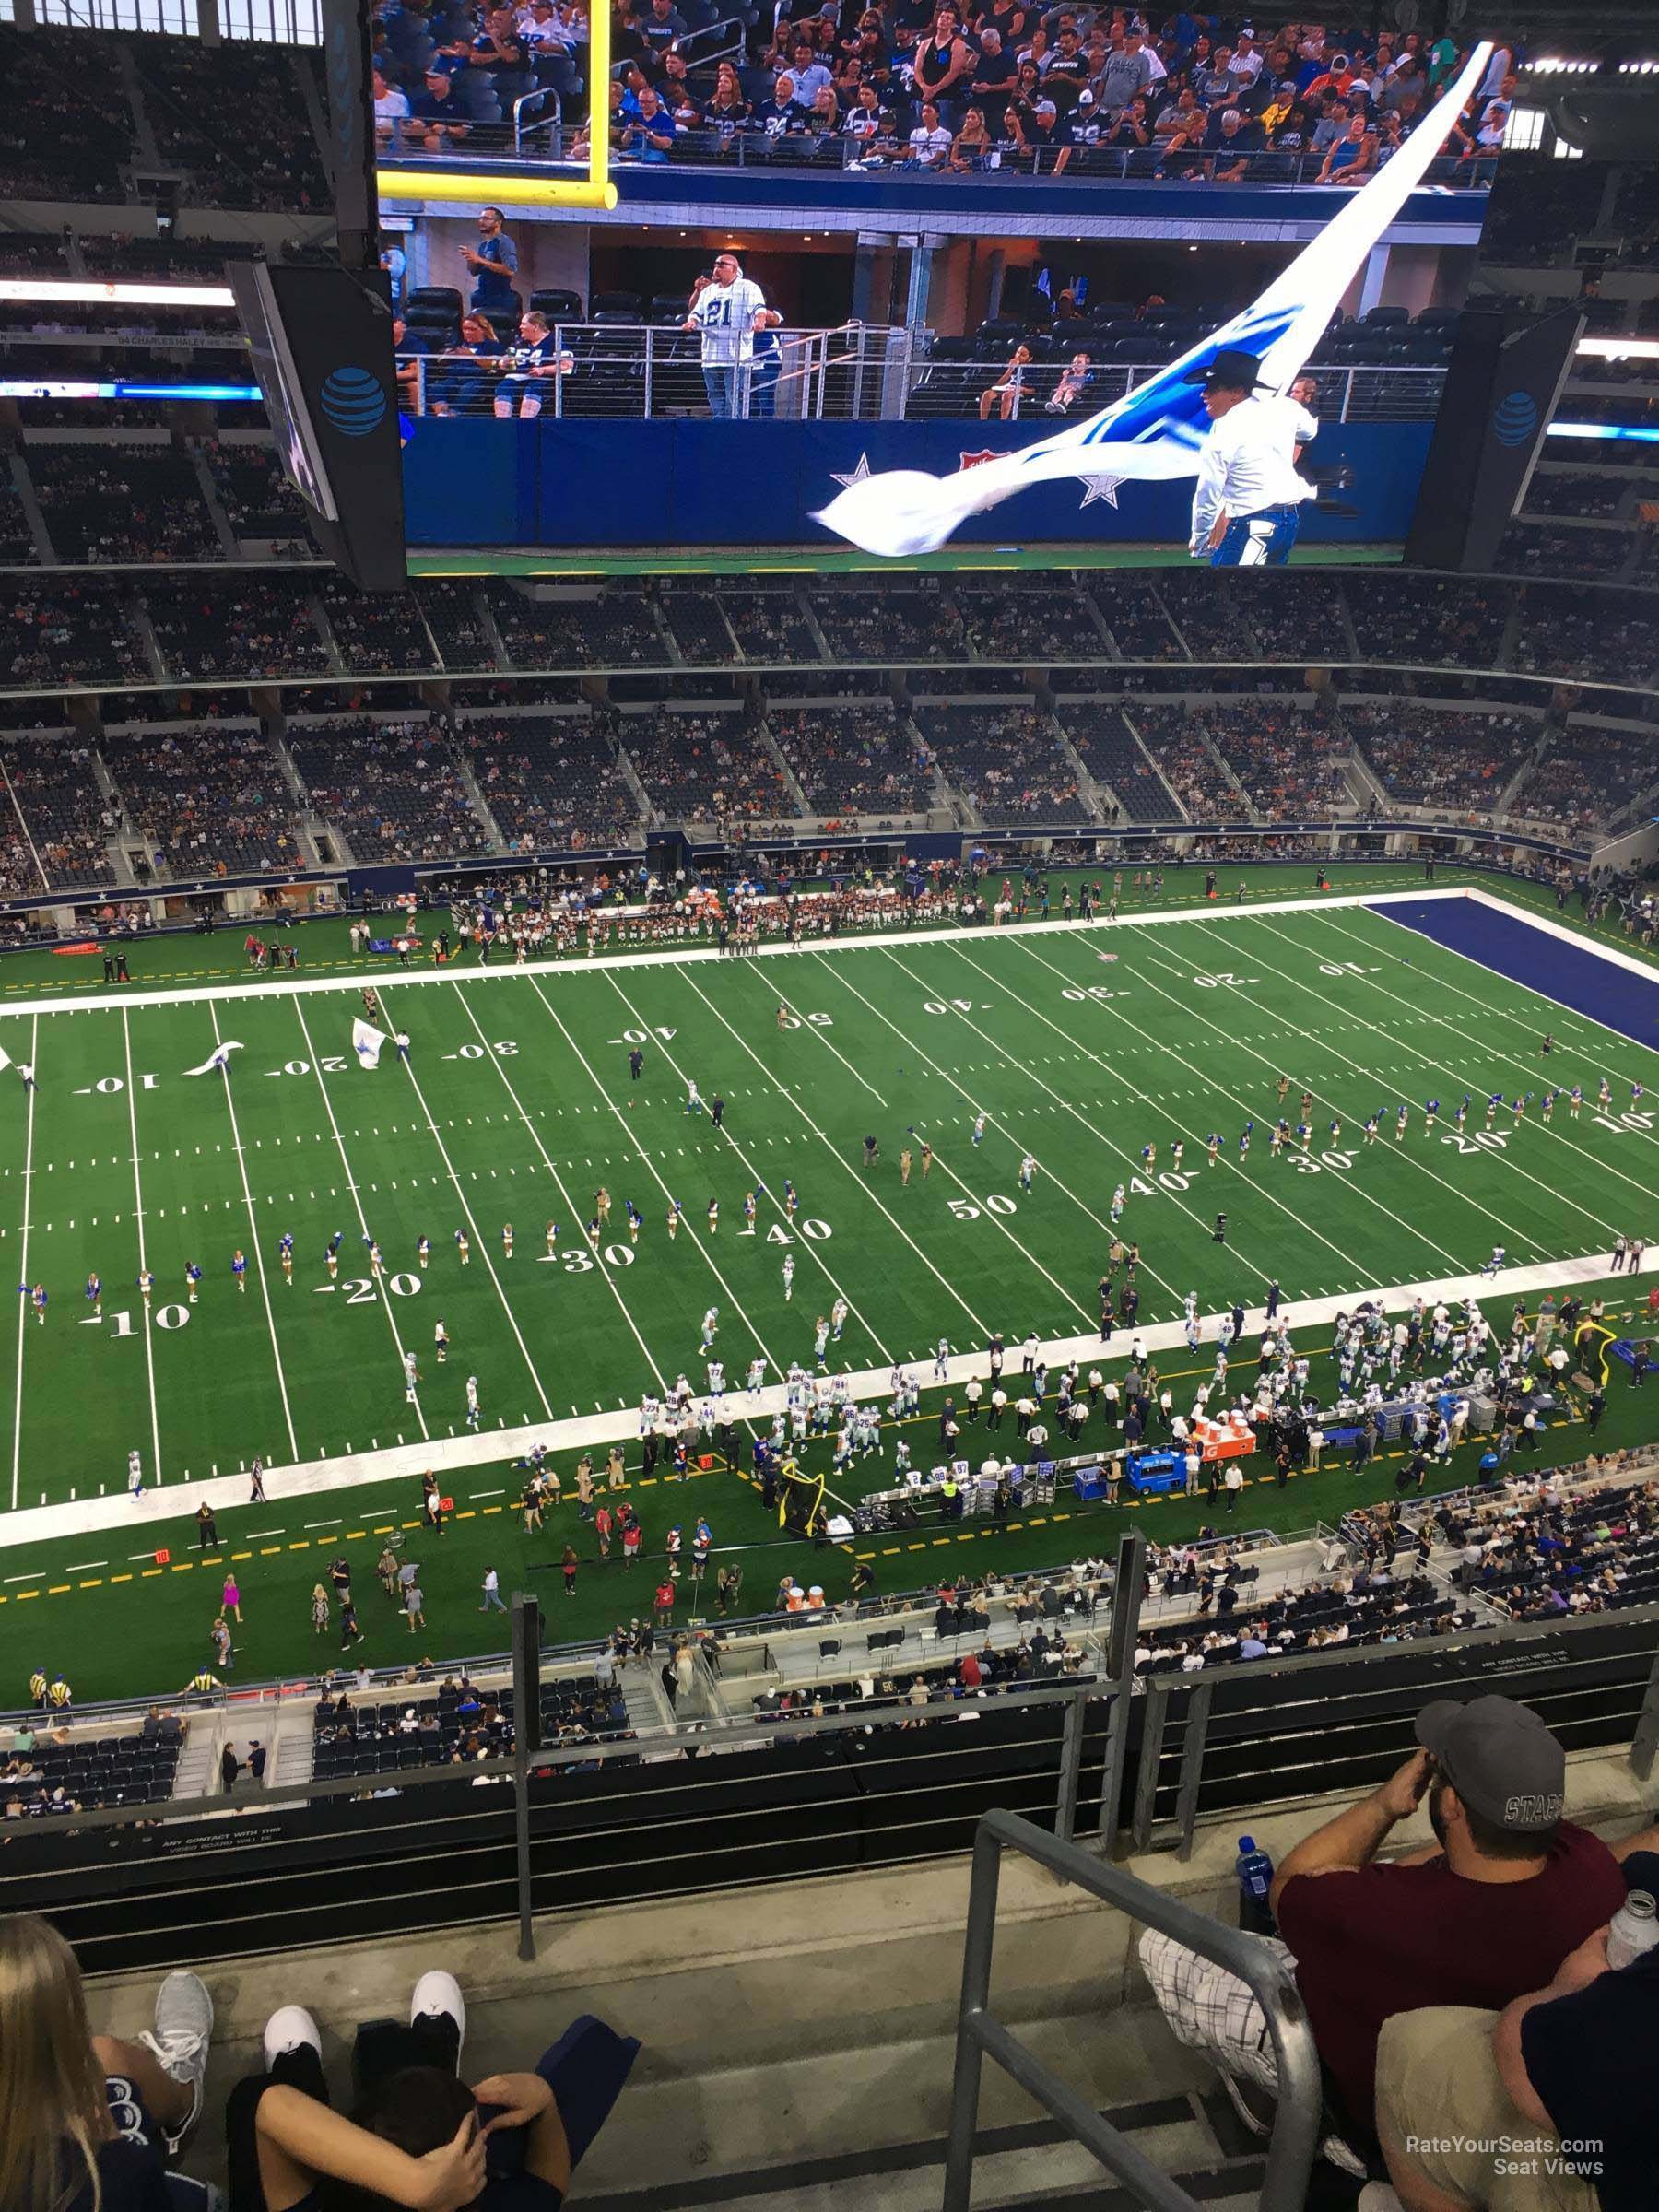 section 416, row 4 seat view  for football - at&t stadium (cowboys stadium)